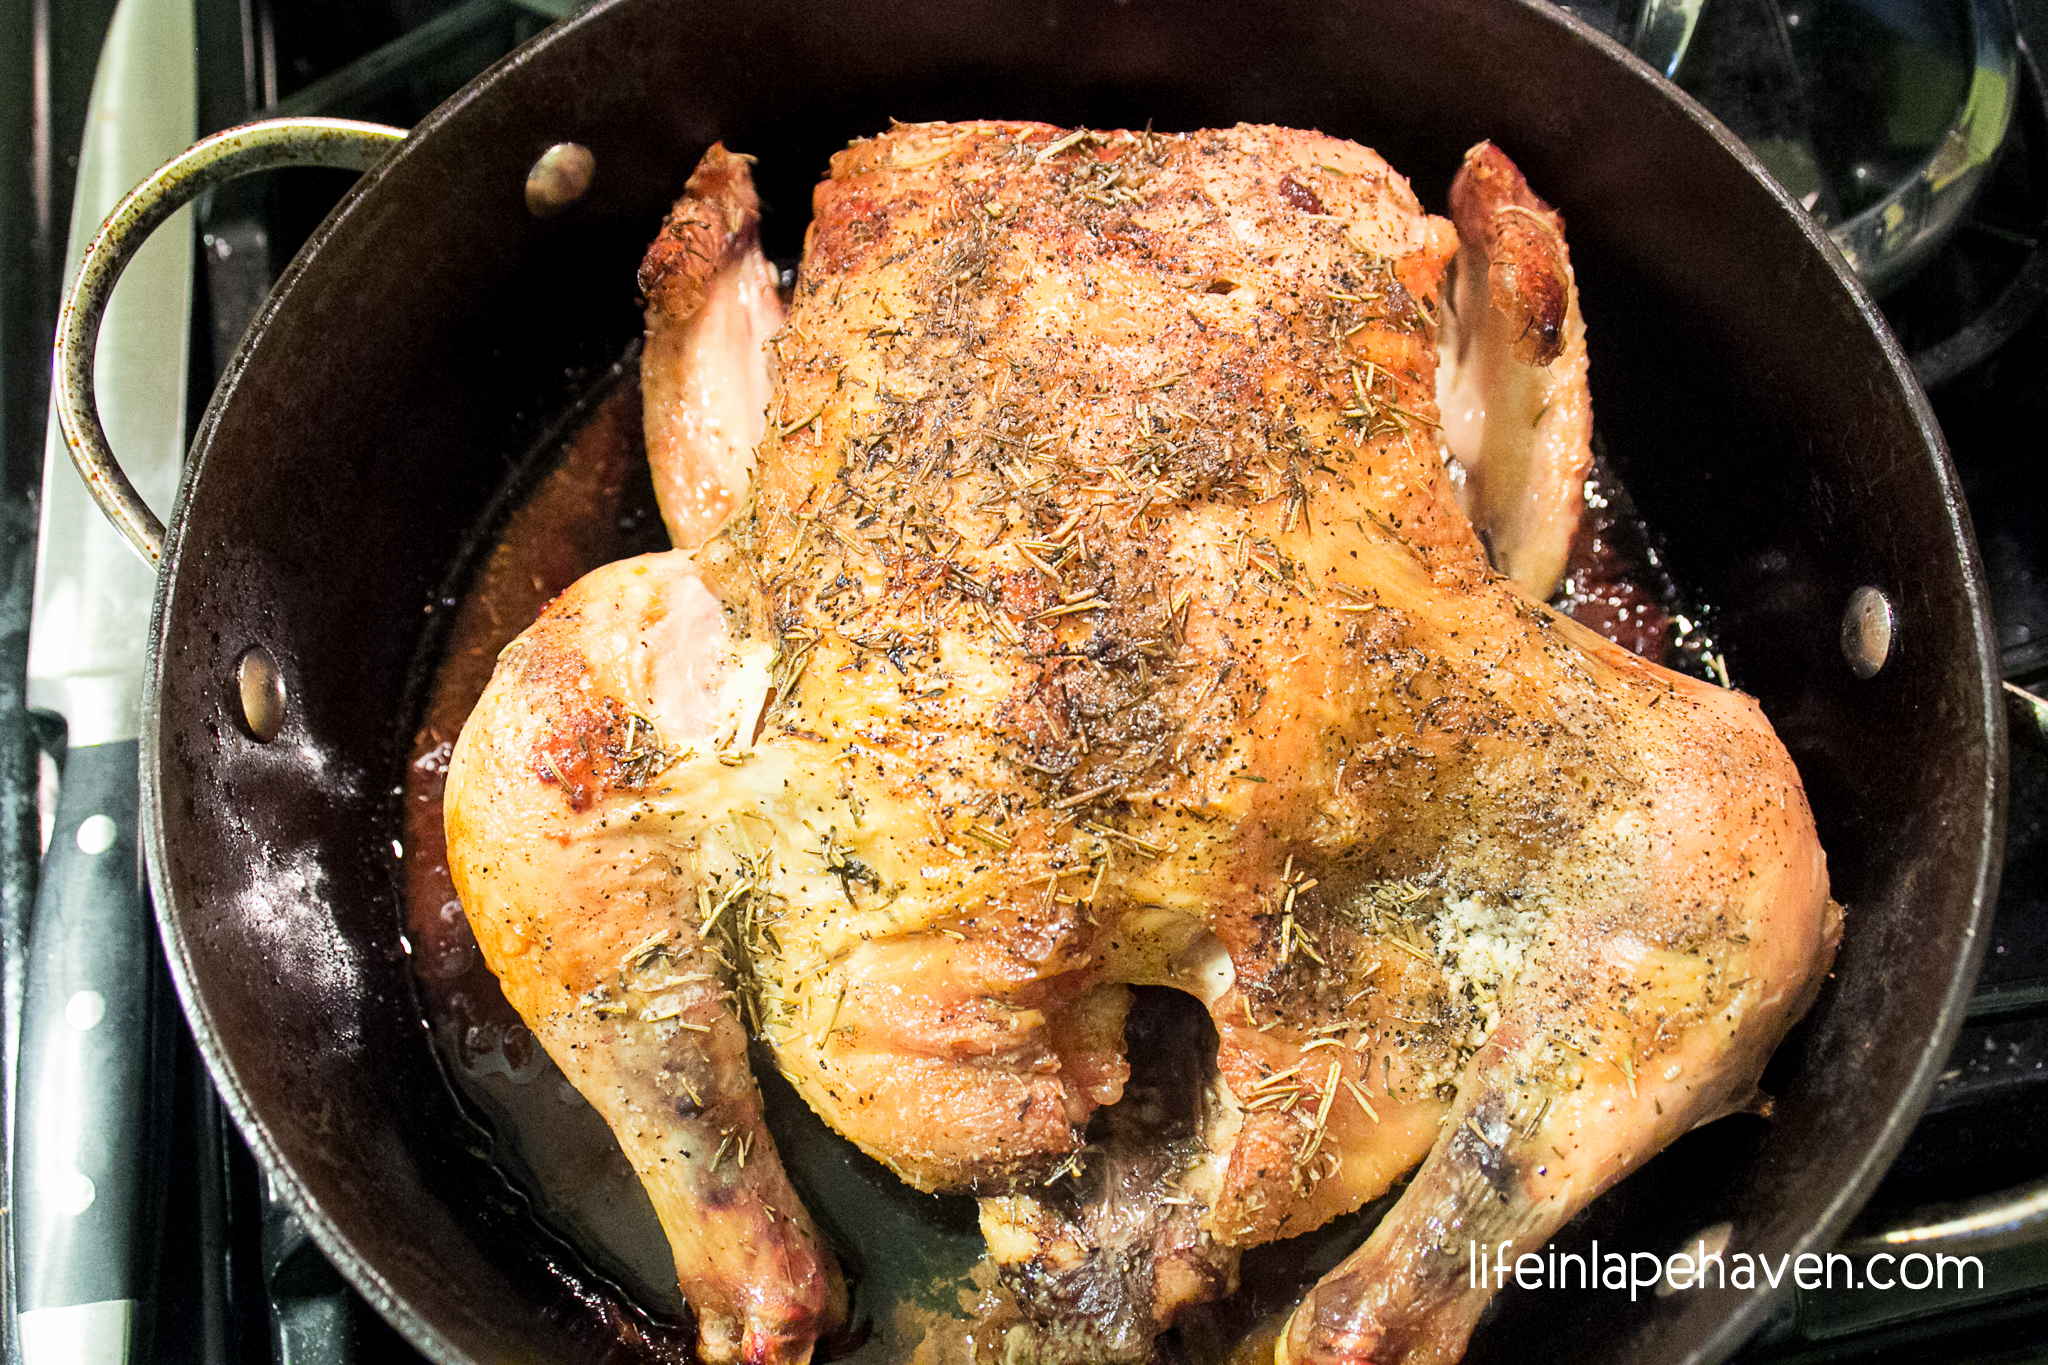 Life in Lape Haven: Tried It Tuesday: Oven Roasted Chicken. Delicious, juicy chicken is easy to make when you roast it in the oven. Seasoned simply with rosemary , thyme, salt, & pepper, cooking the chicken at a high temperature creates a crispy skin and juicy, flavorful chicken. Yum!